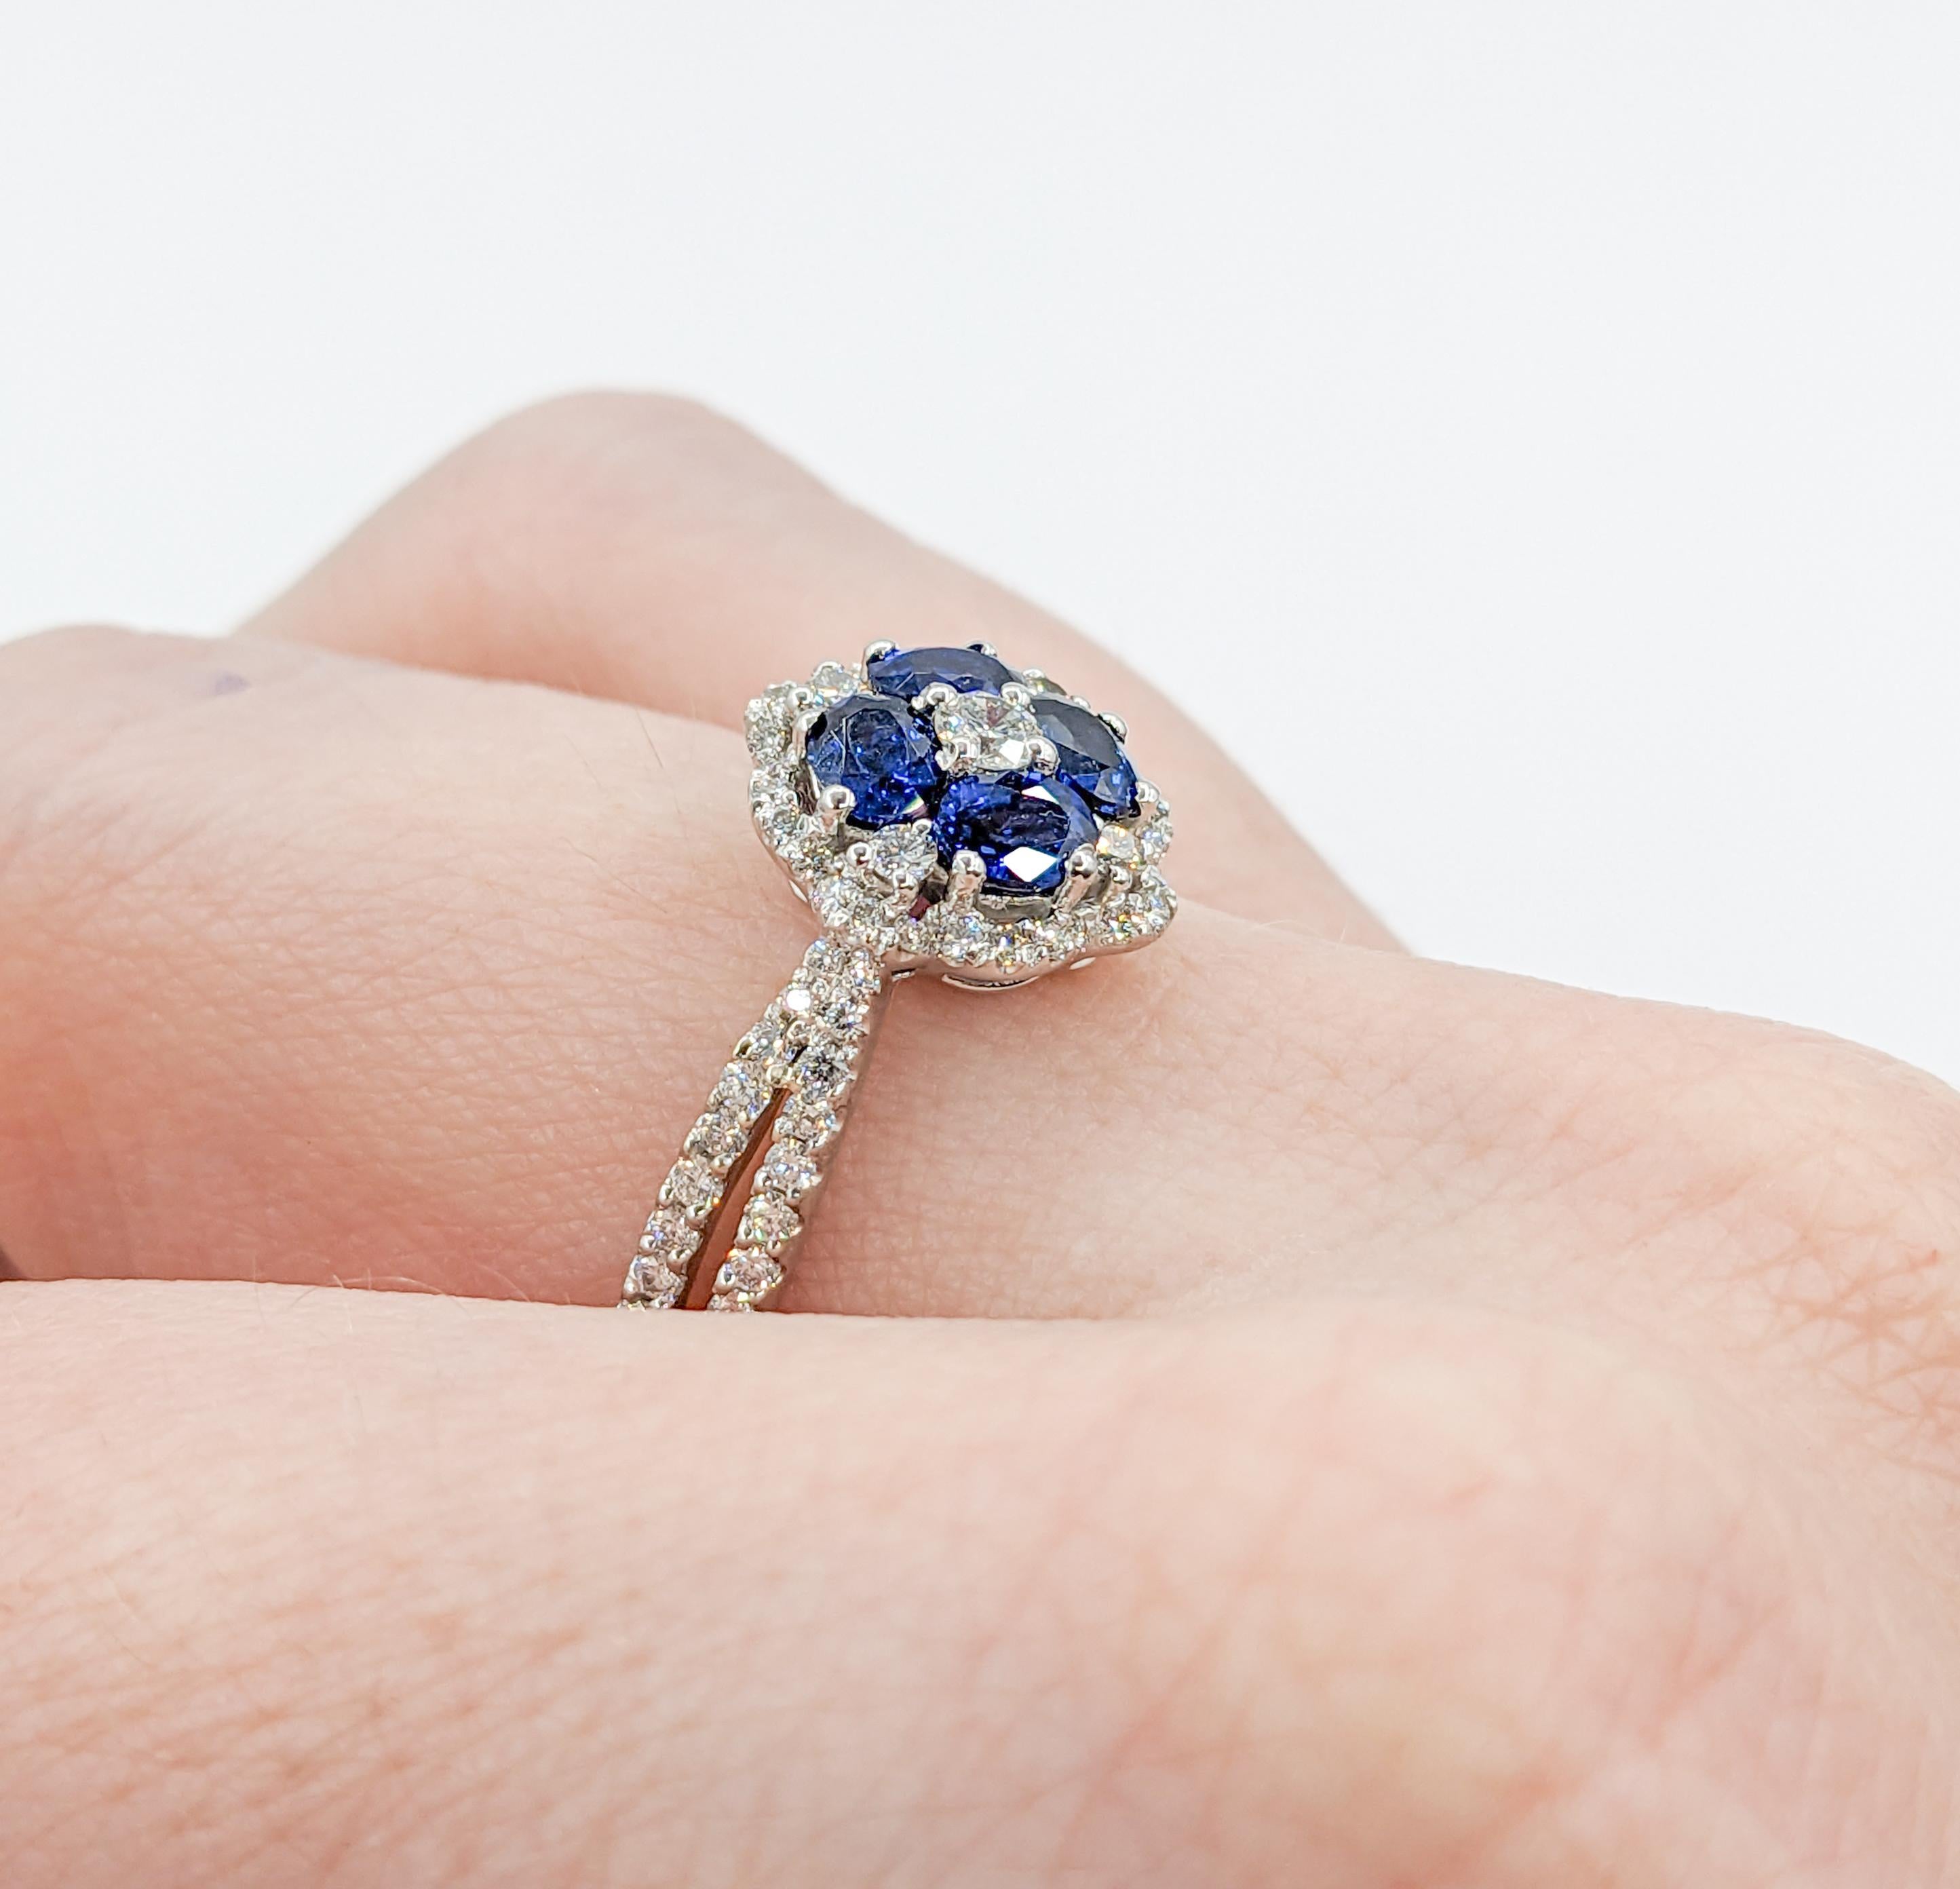 Blue Sapphire & Diamond Ring in 18k White Gold In Excellent Condition For Sale In Bloomington, MN